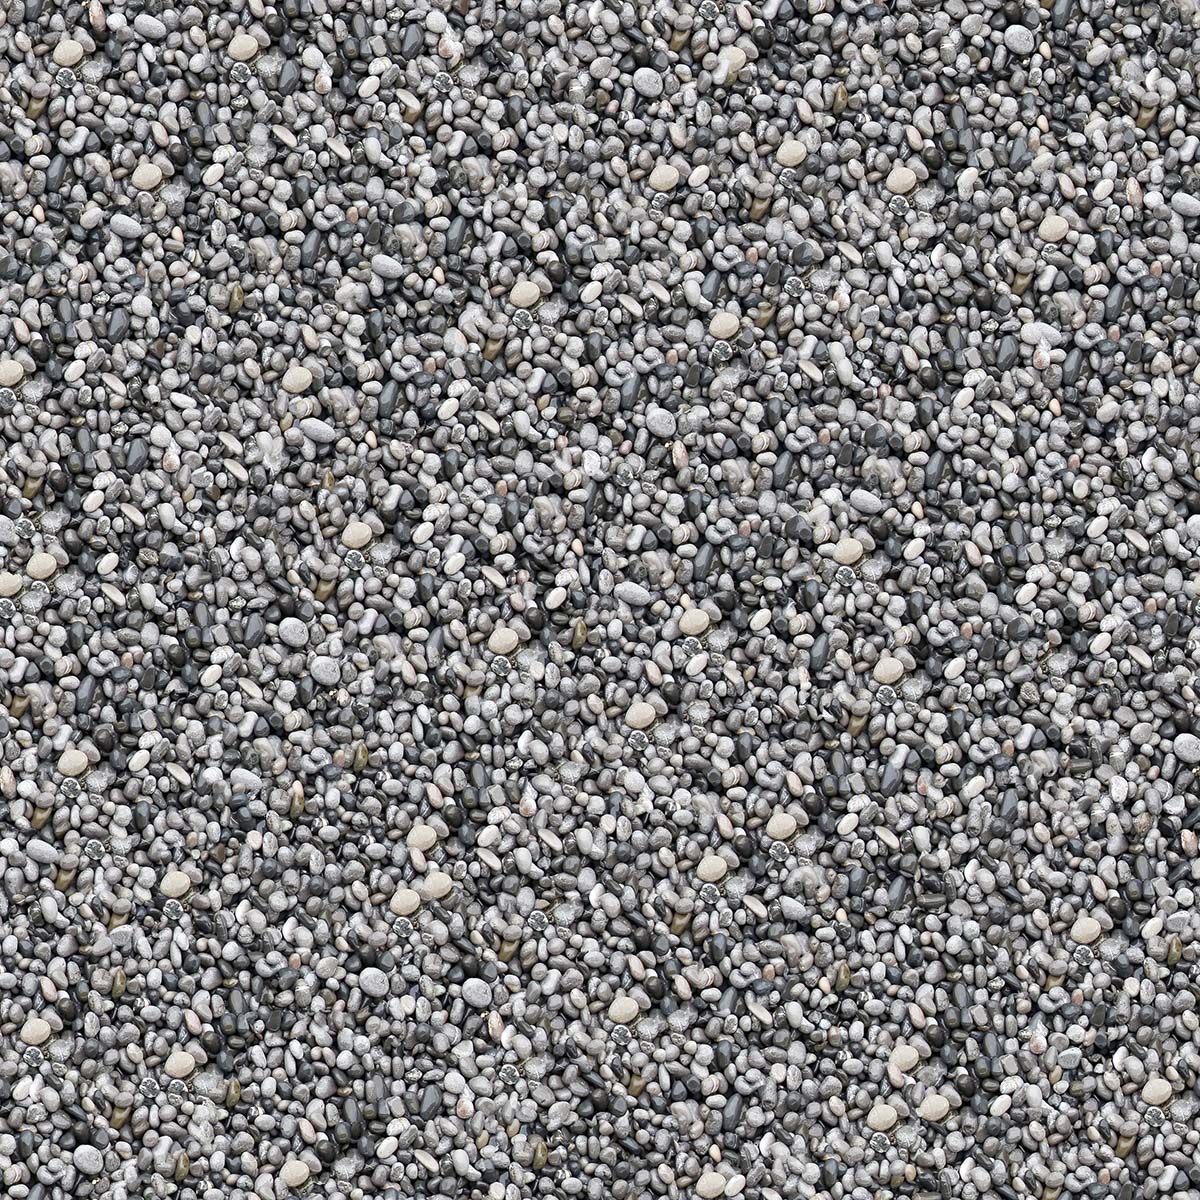 A close-up of a pile of small rocks